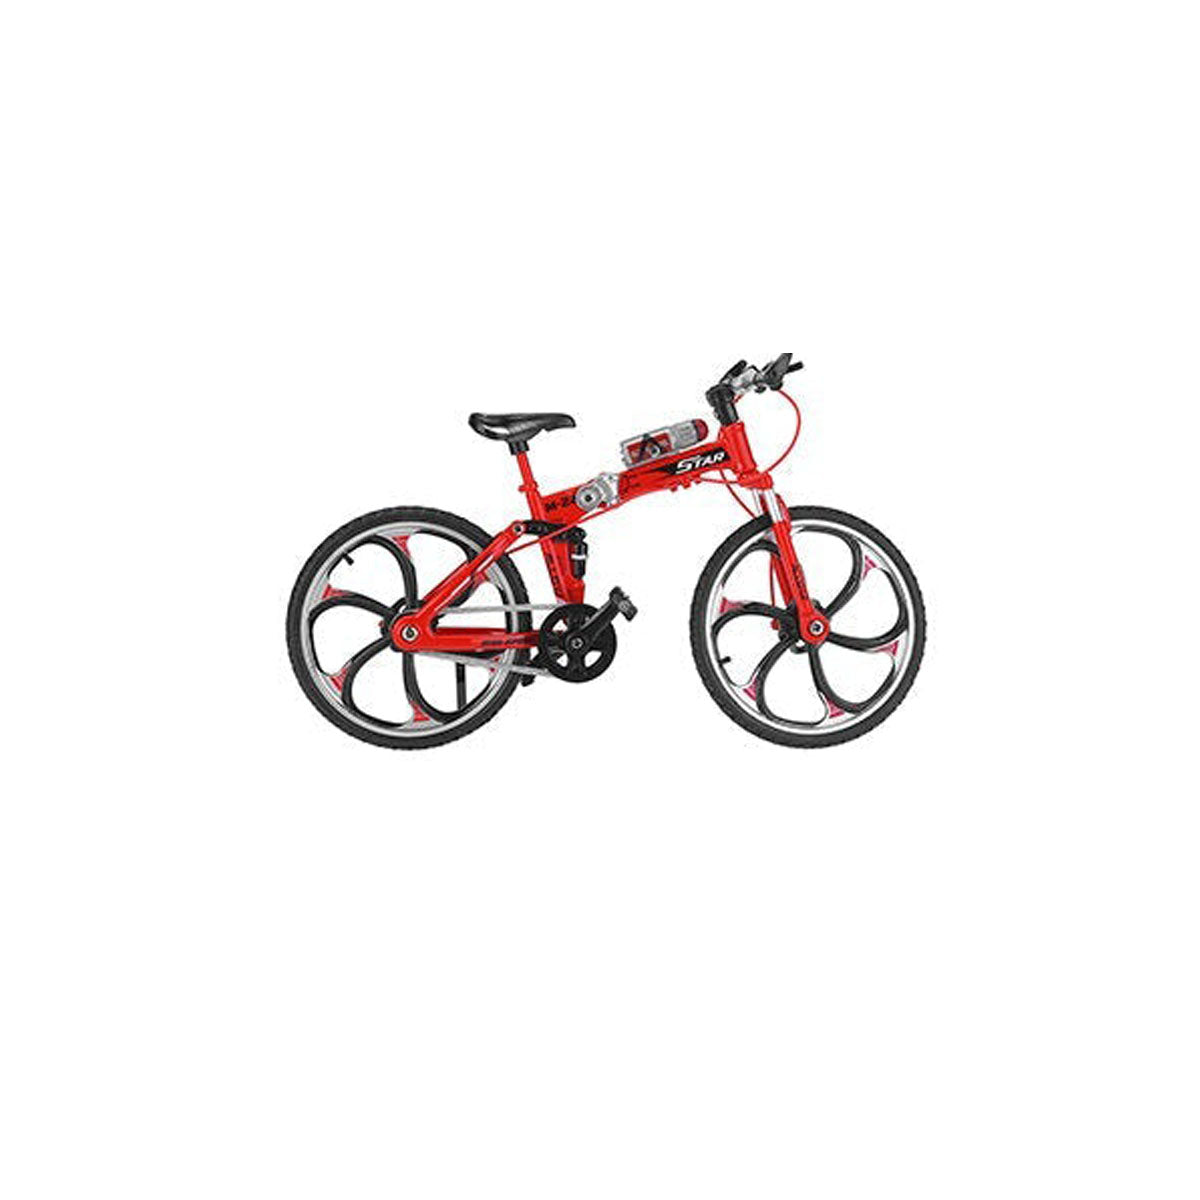 1:10 Diecast Bicycle Model Toys Racing Cycle Cross Mountain Bike Building Gift Decor